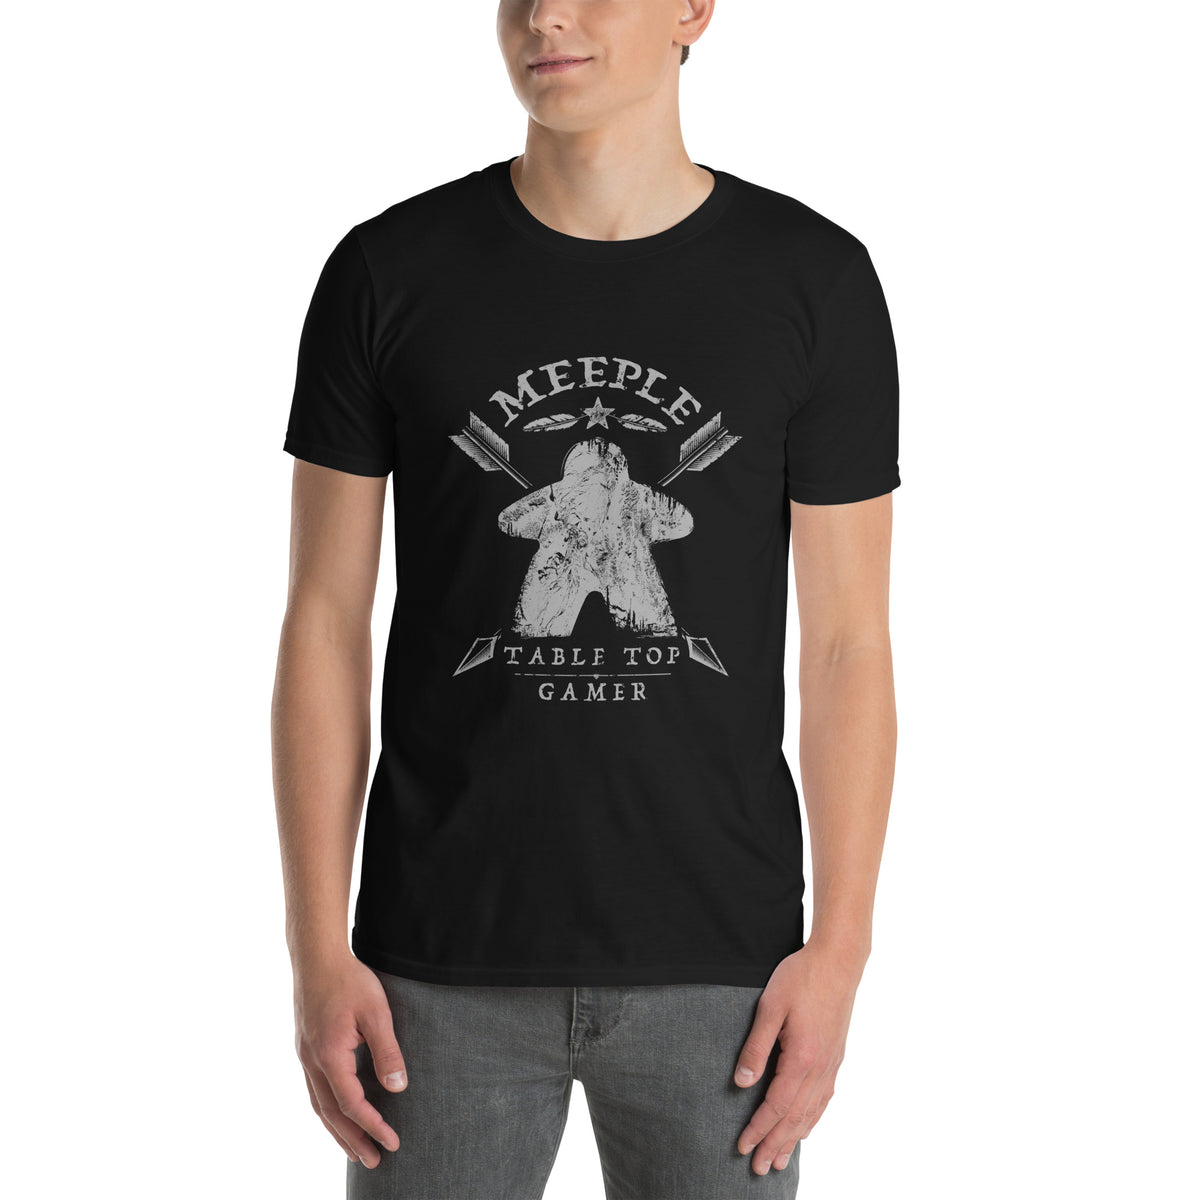 Meeple Table Top Gamer T-Shirt